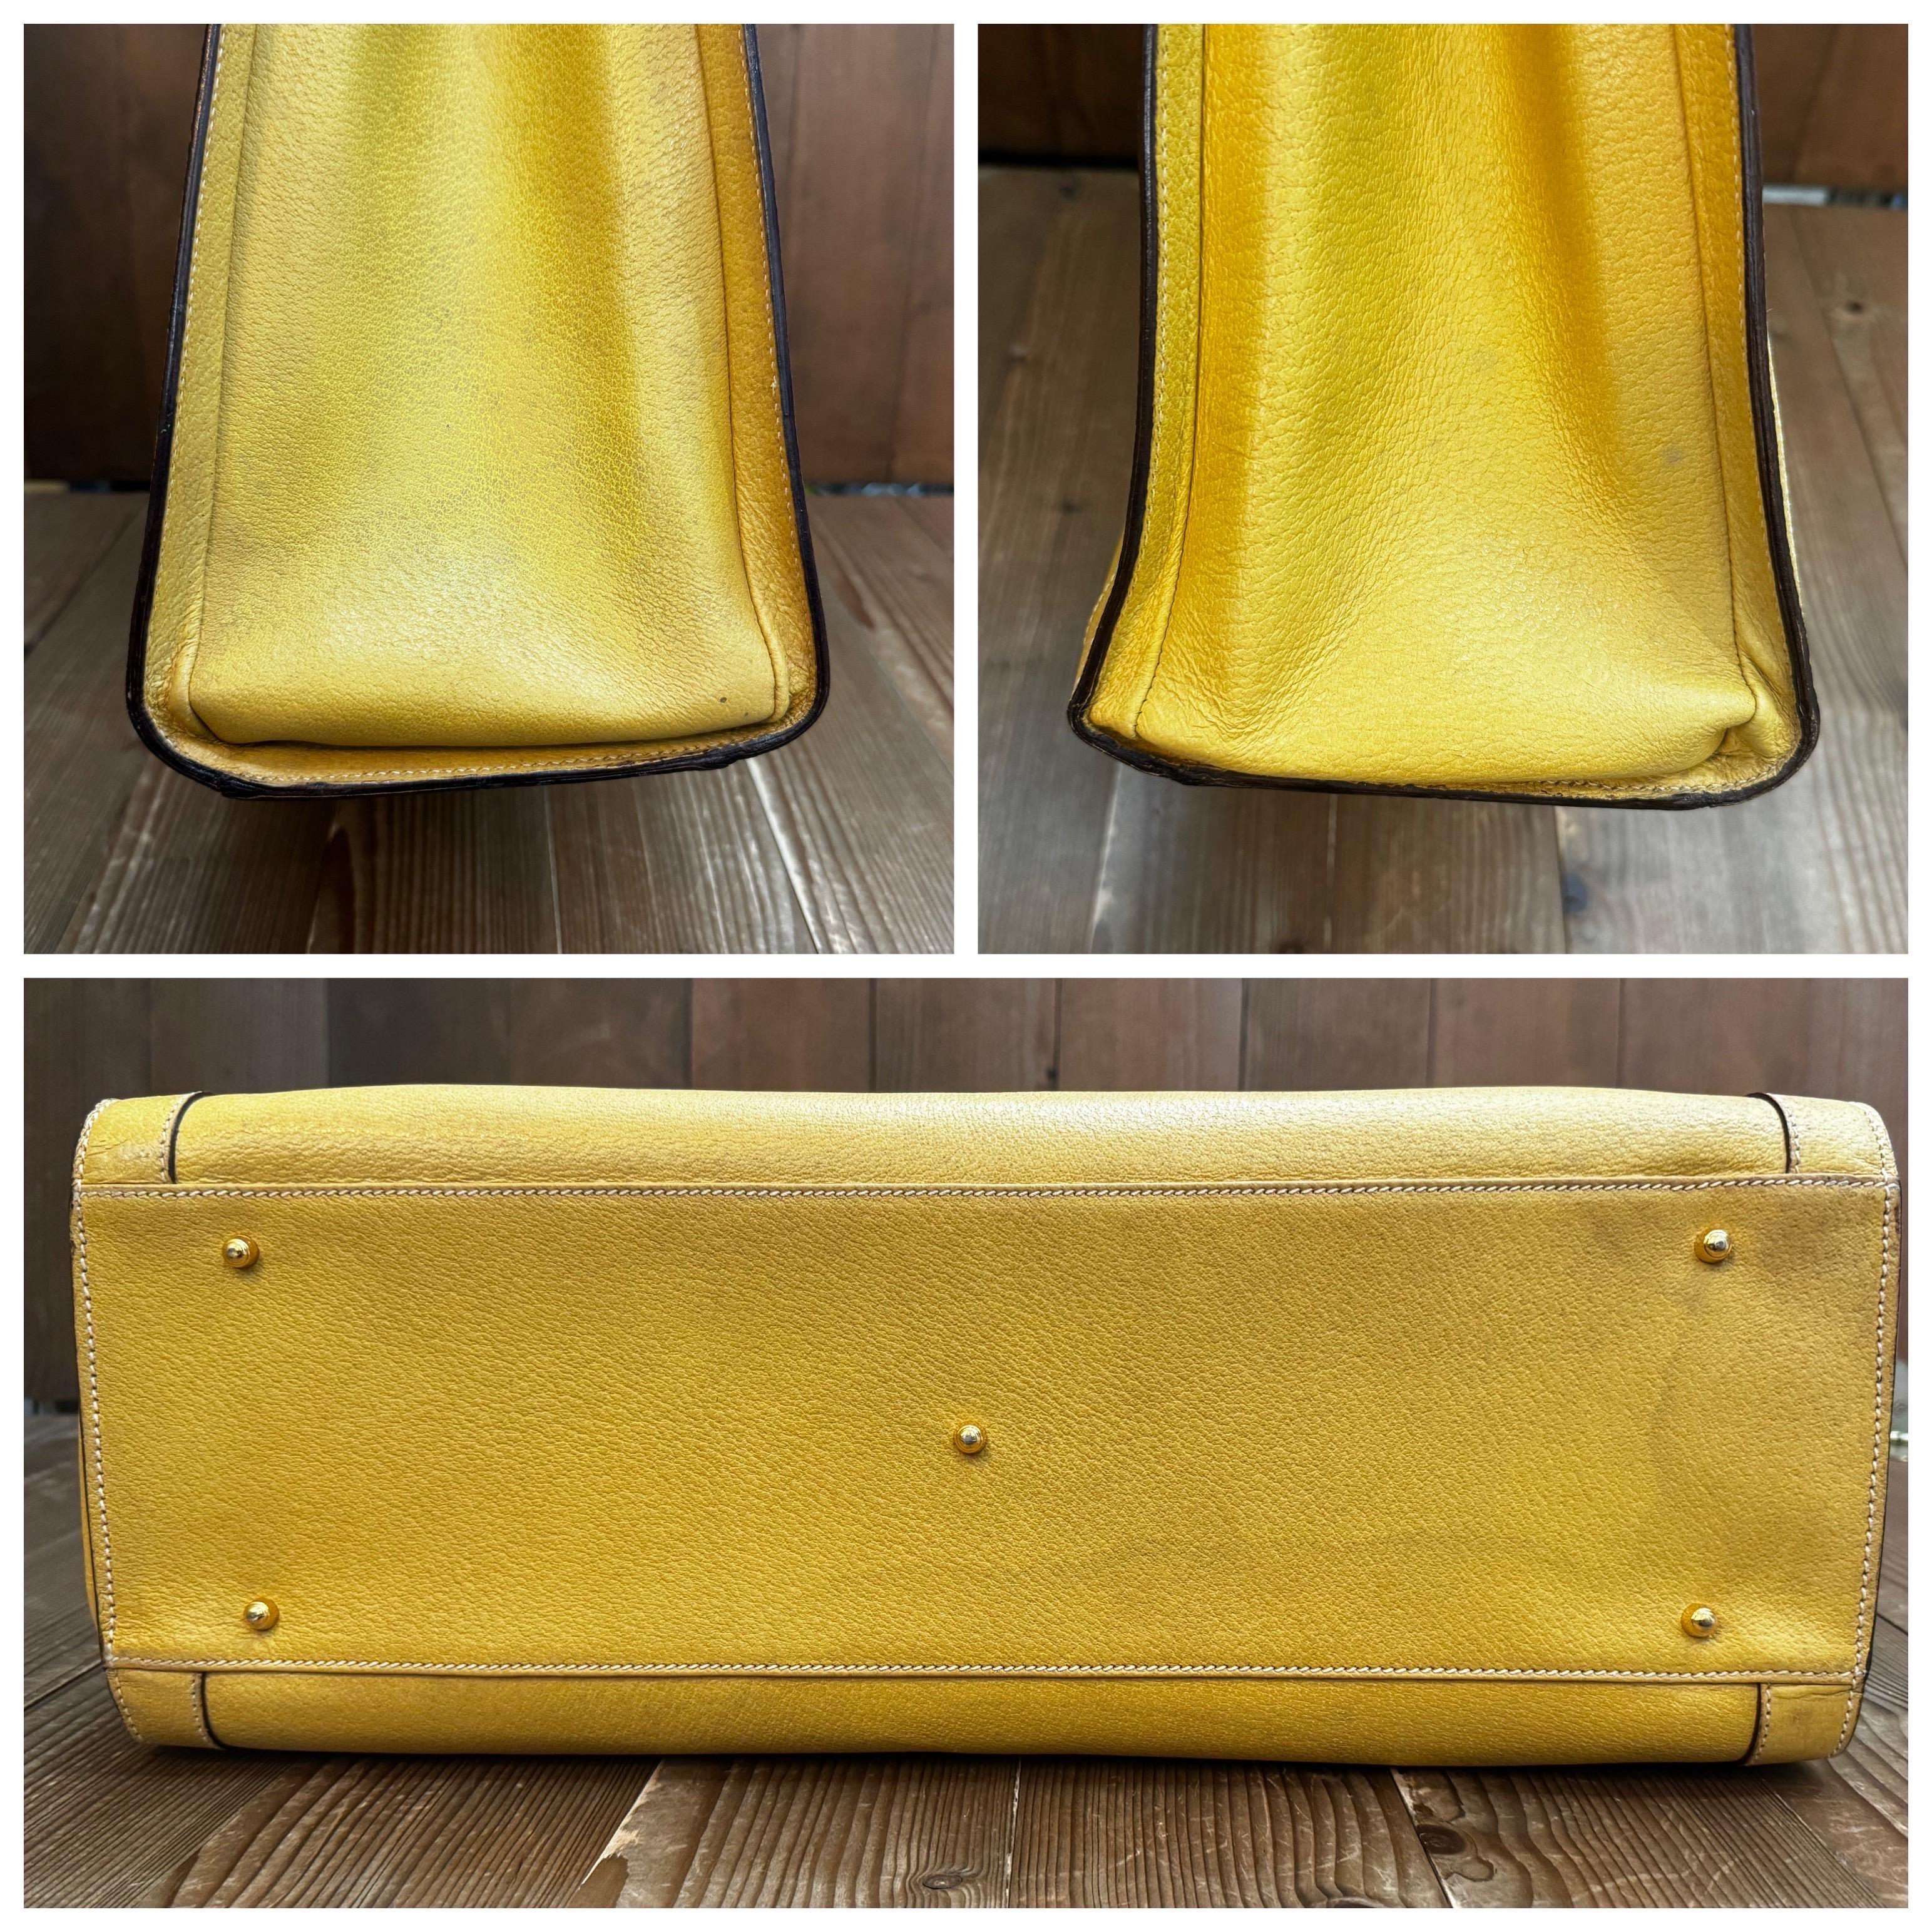 Vintage GUCCI Large Diana Tote Bamboo Tote Bag Leather Yellow Single Compartment For Sale 3